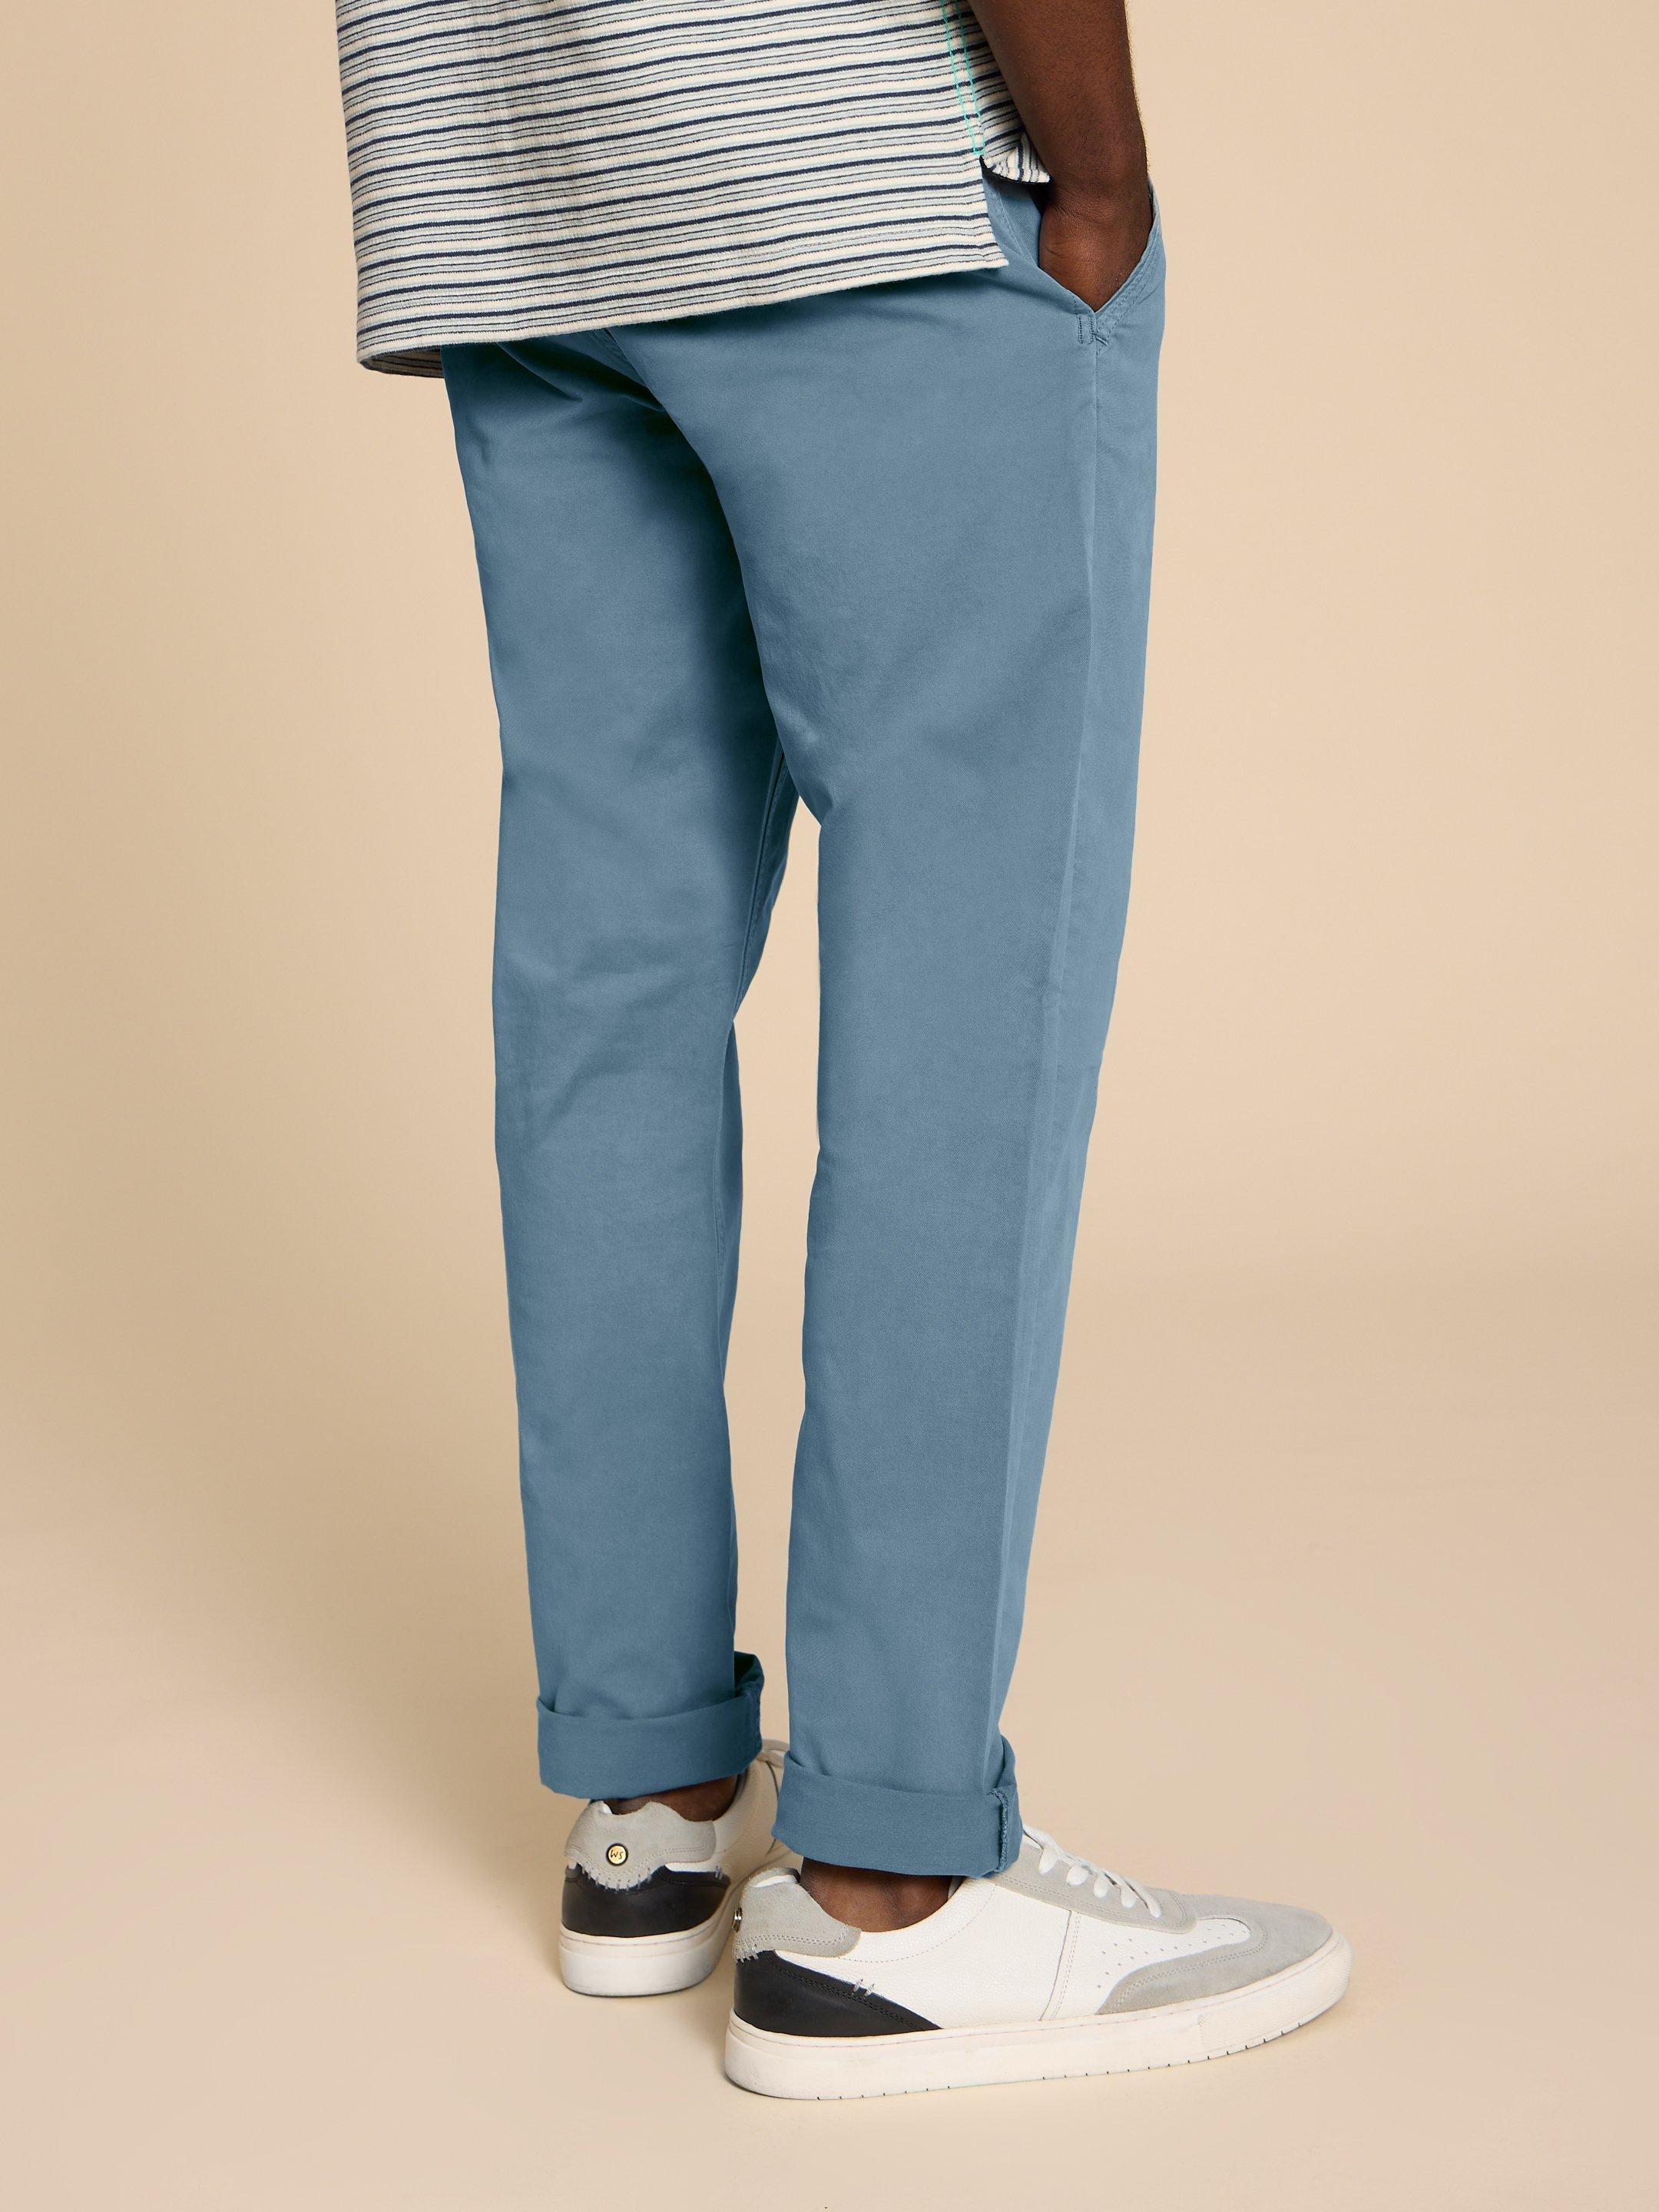 Sutton Organic Chino Trouser in MID BLUE - MODEL BACK